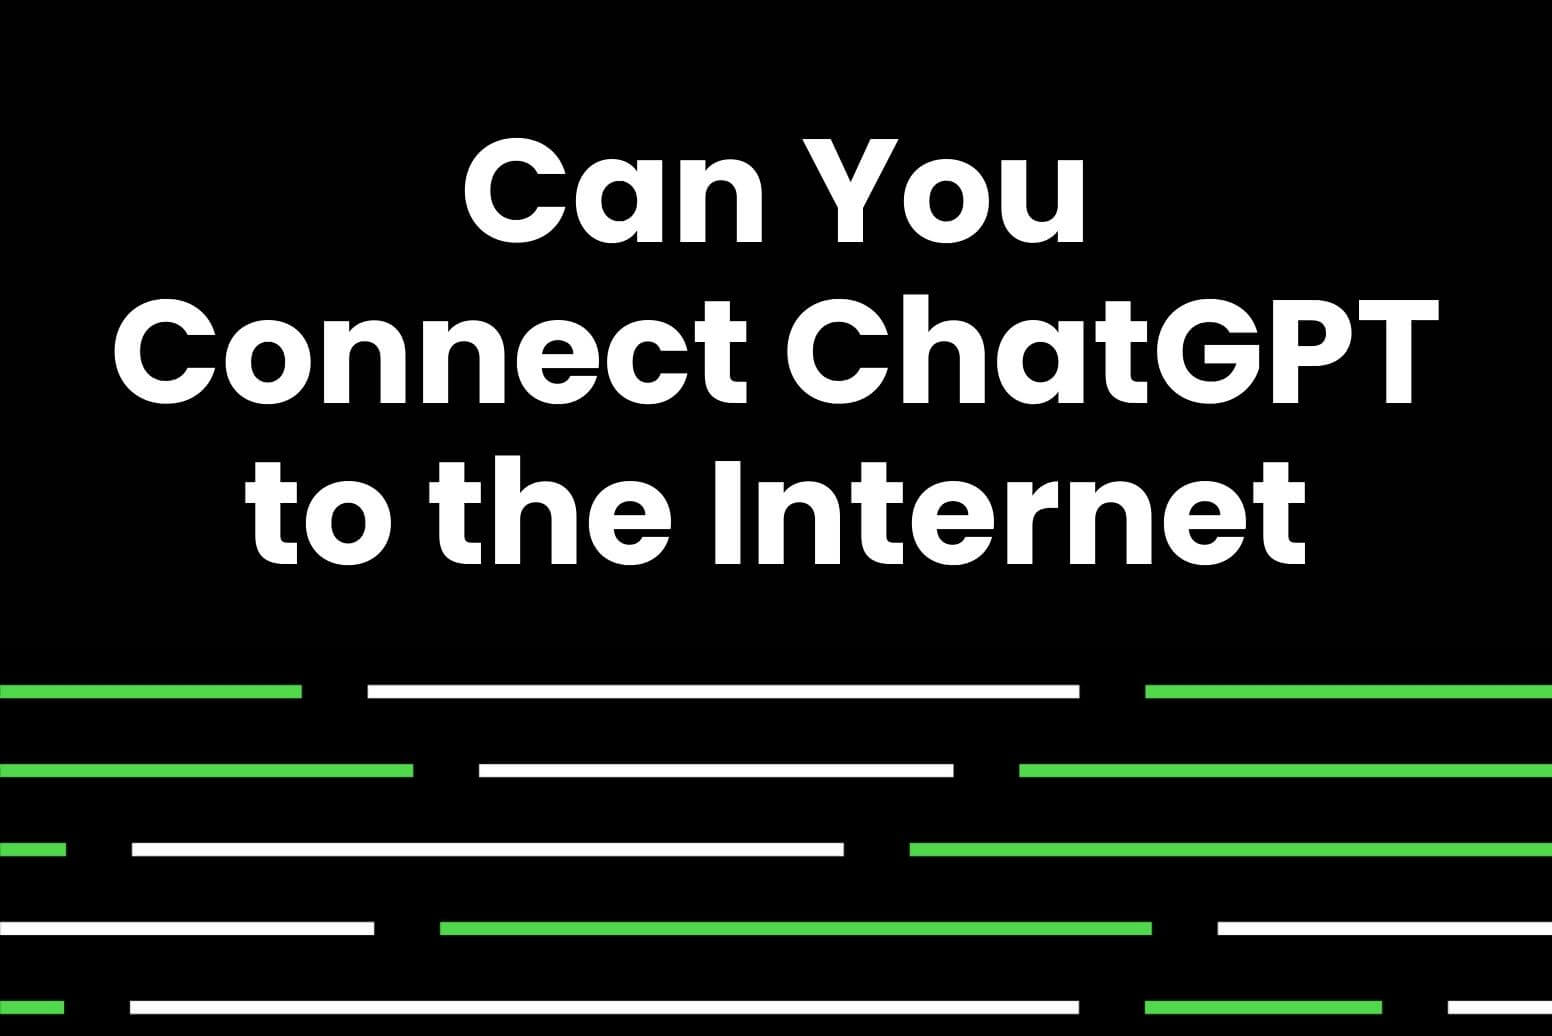 Can you connect ChatGPT to internet